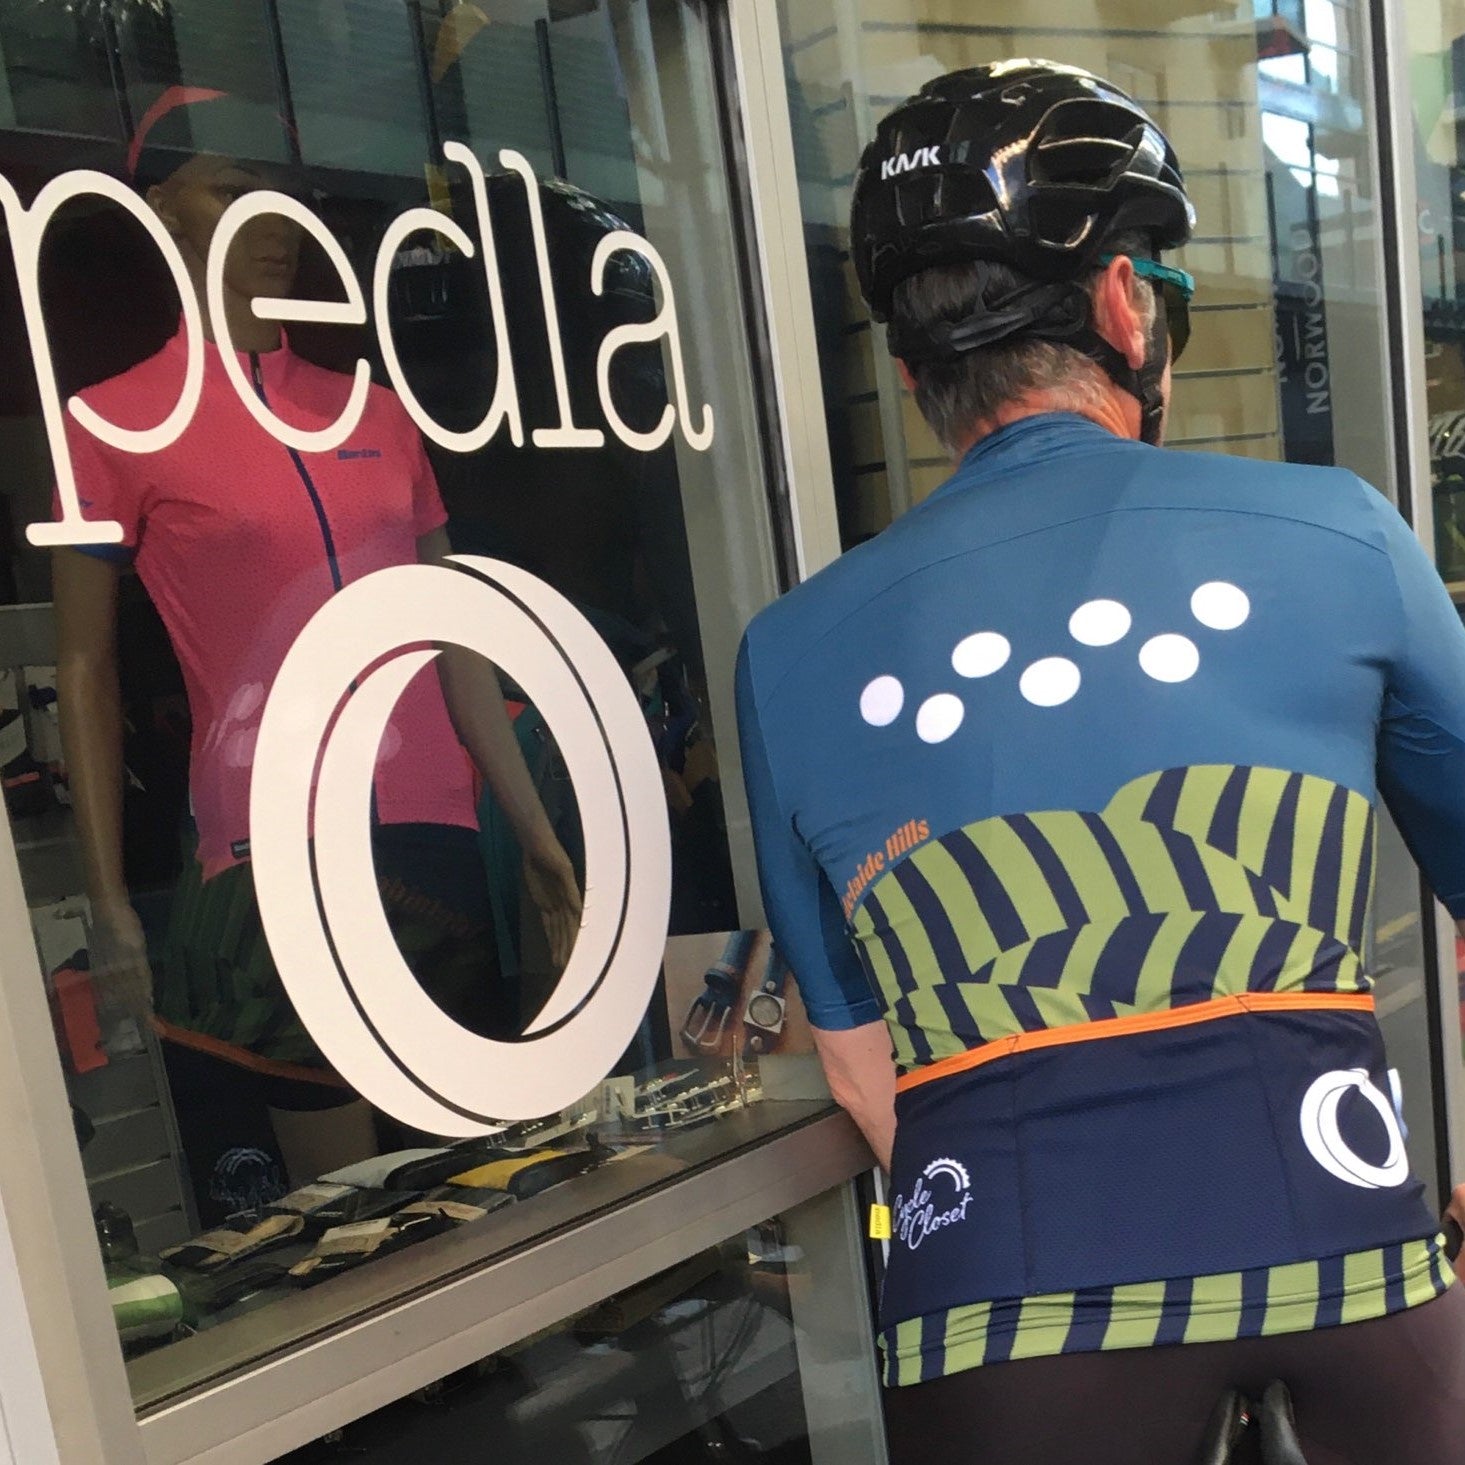 Pedla Men's LunaLuxe Special Edition Adelaide Hills Jersey, 2020 - Cycle Closet